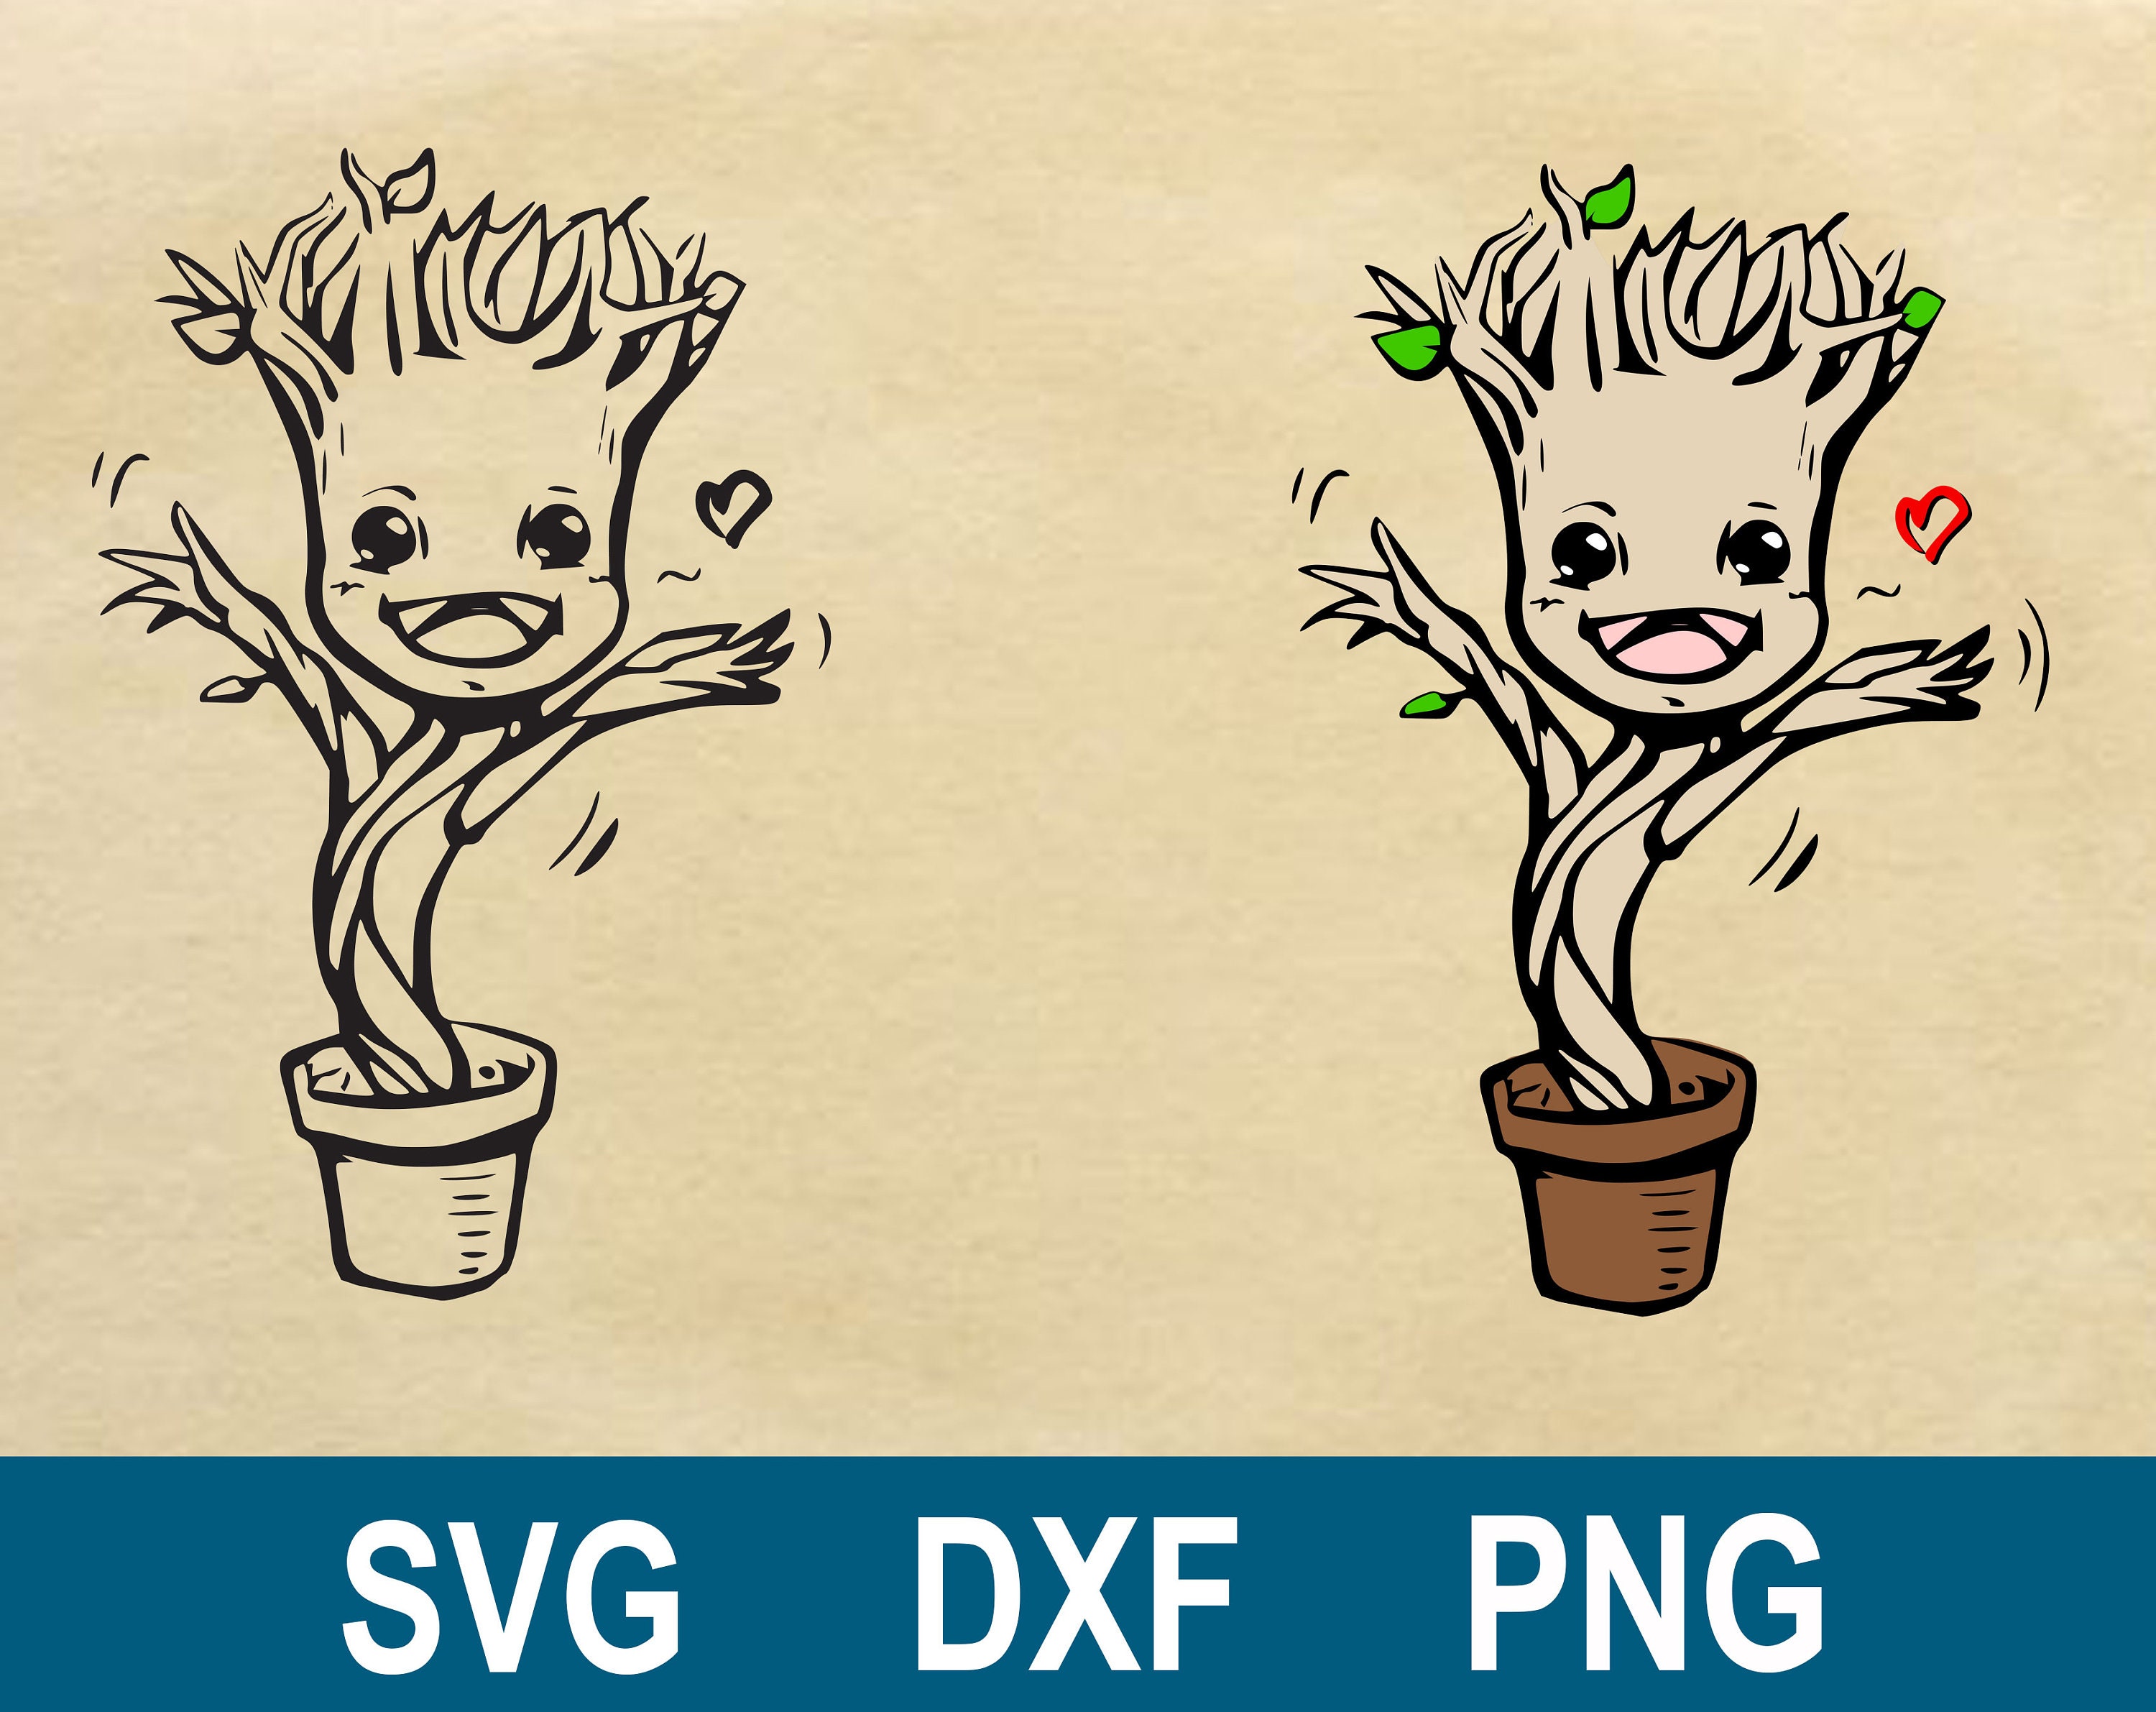 Download Baby Groot SVG DXF PNG Clipart Silhouette and Cut Files. | Etsy